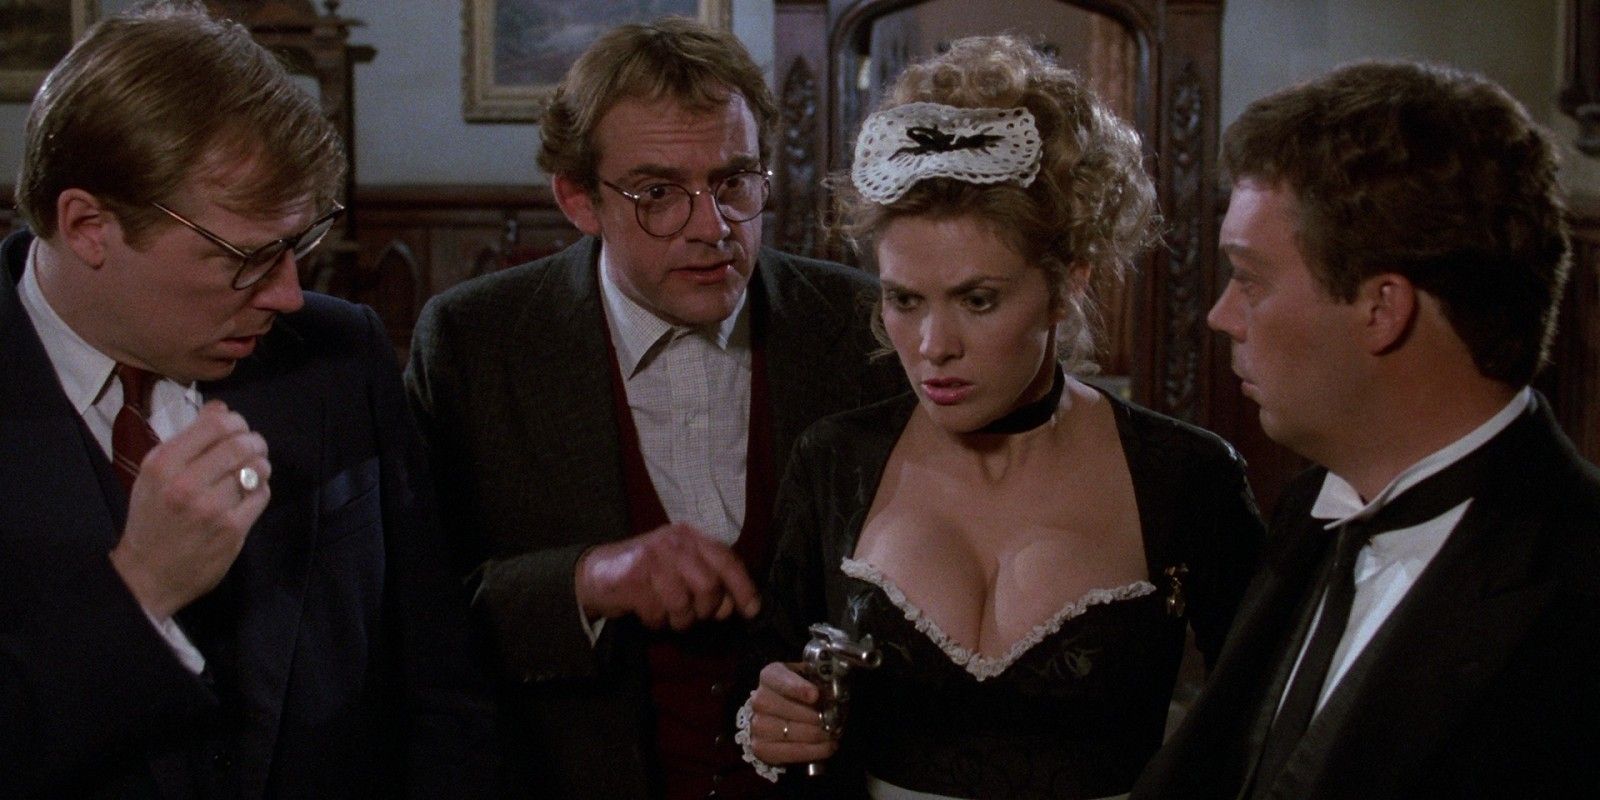 The guests together in the 1985 movie Clue